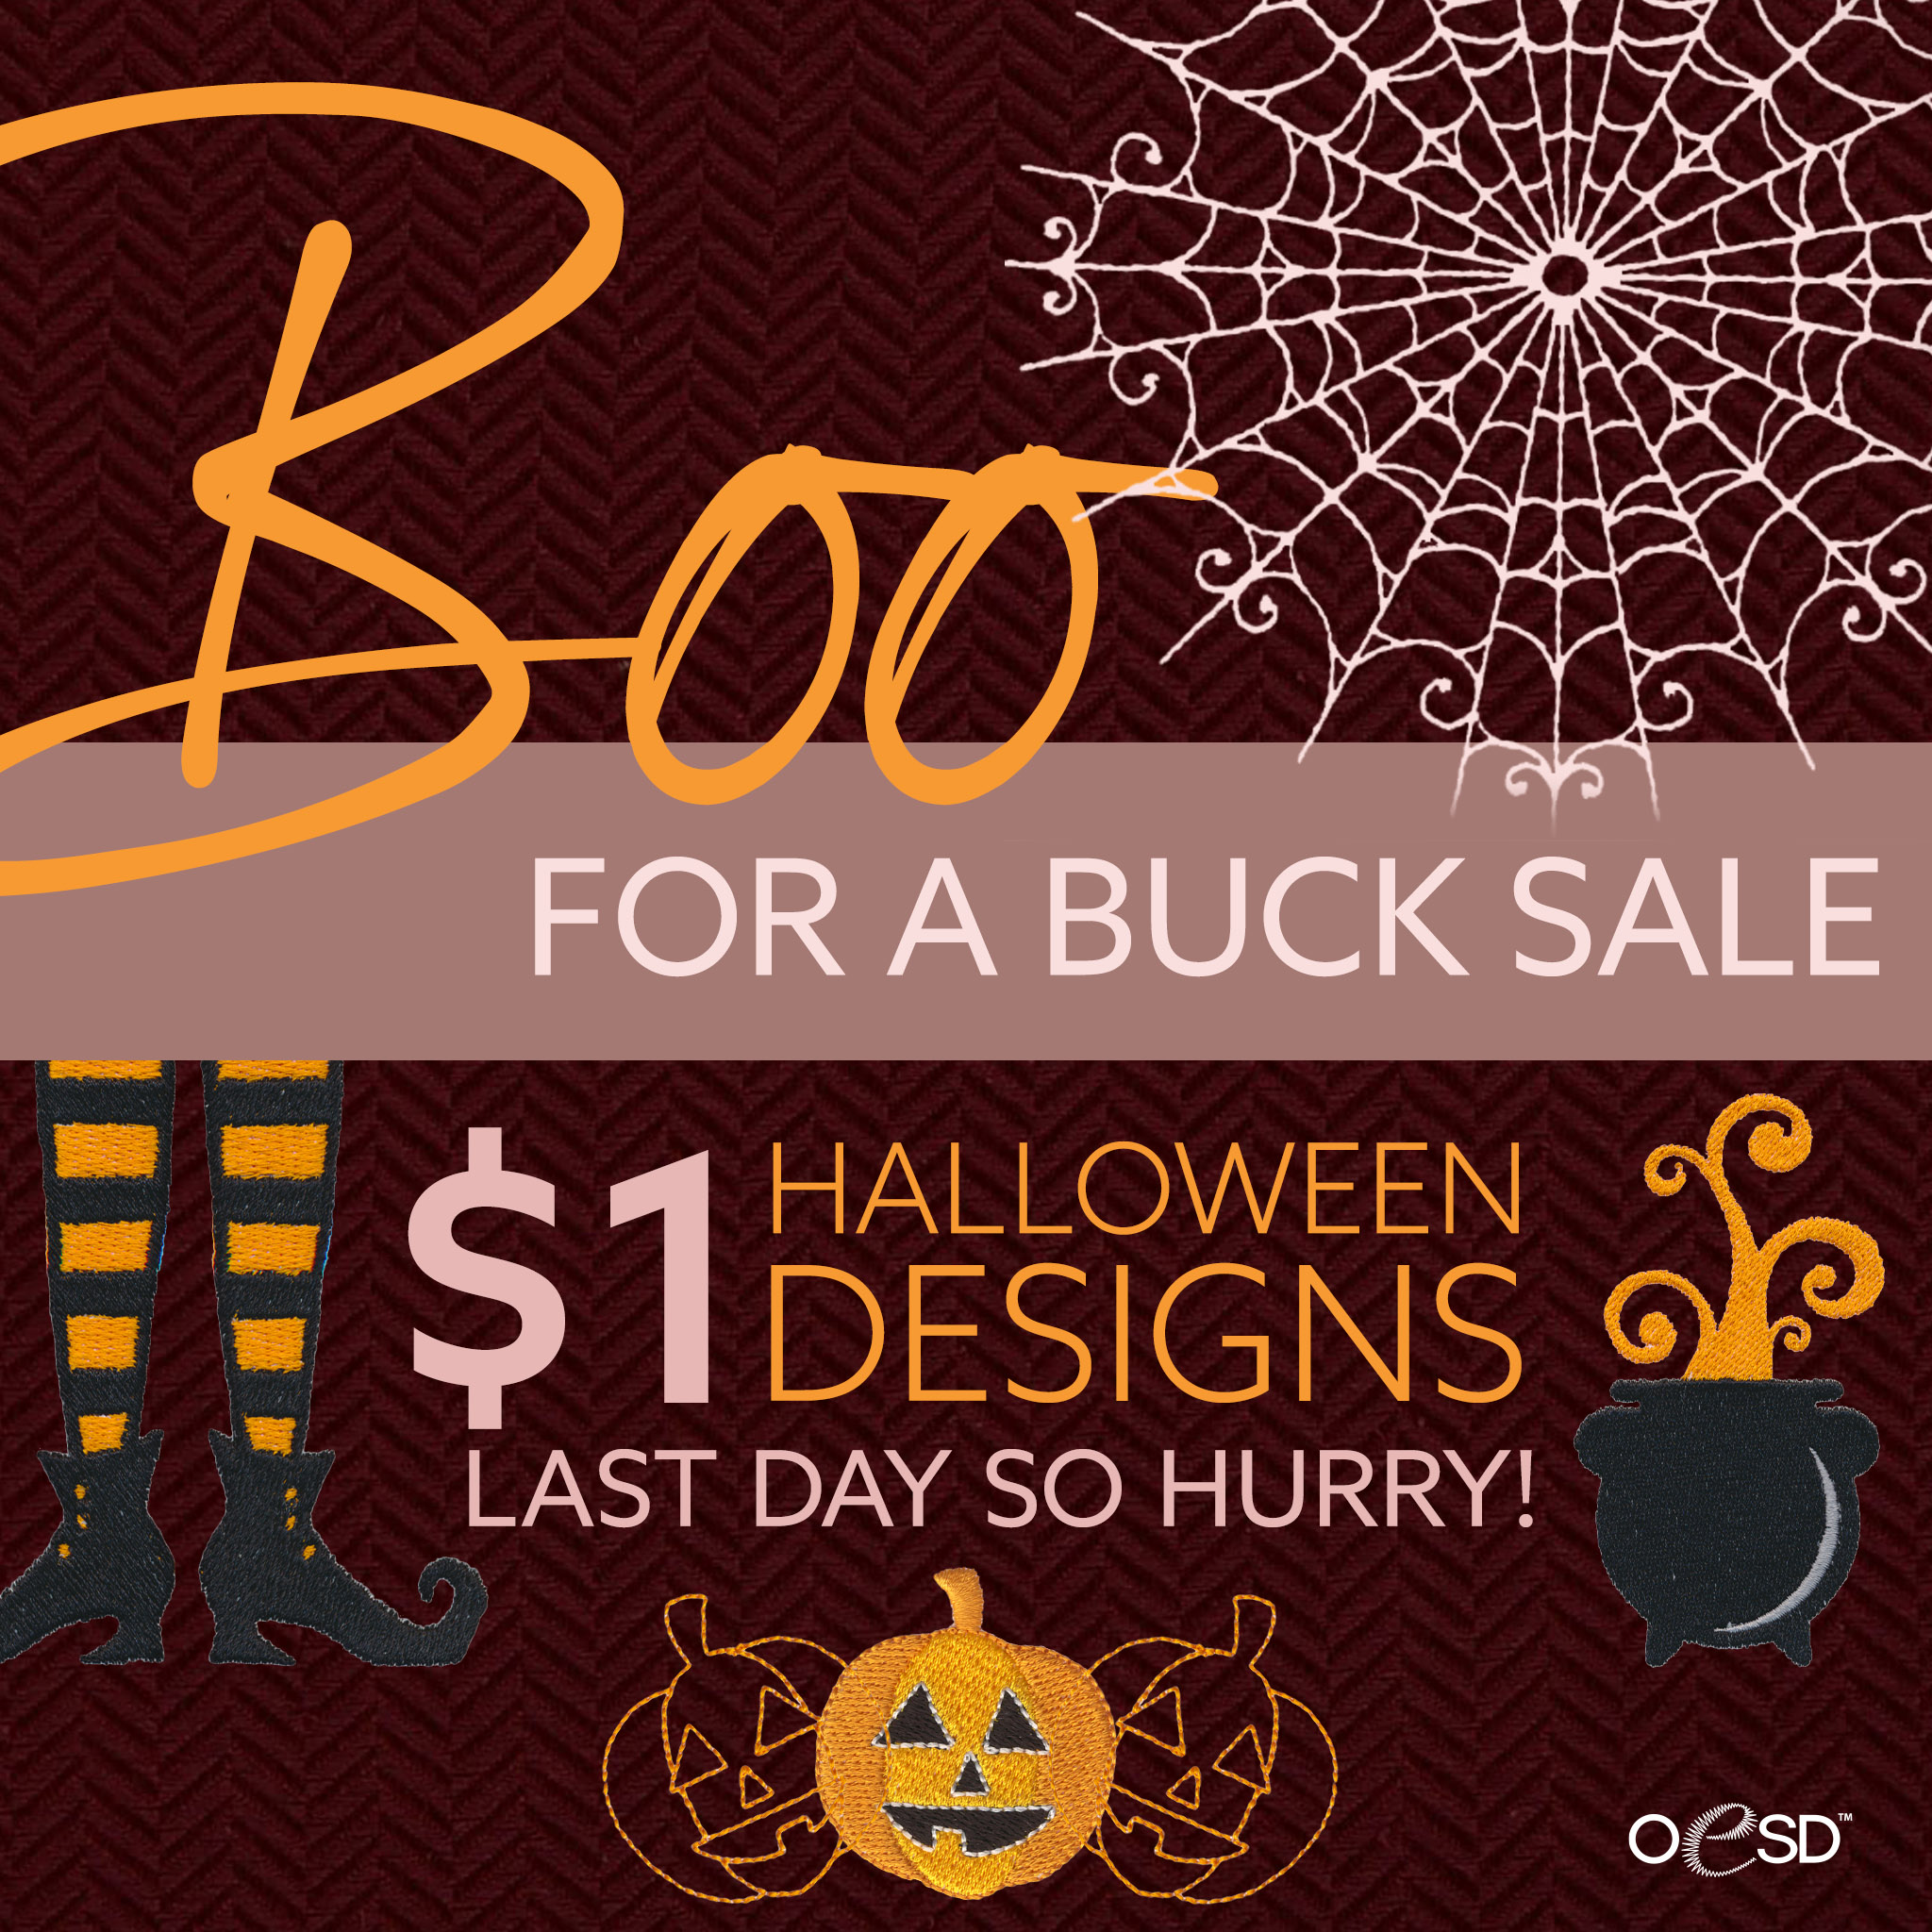 boo for a buck